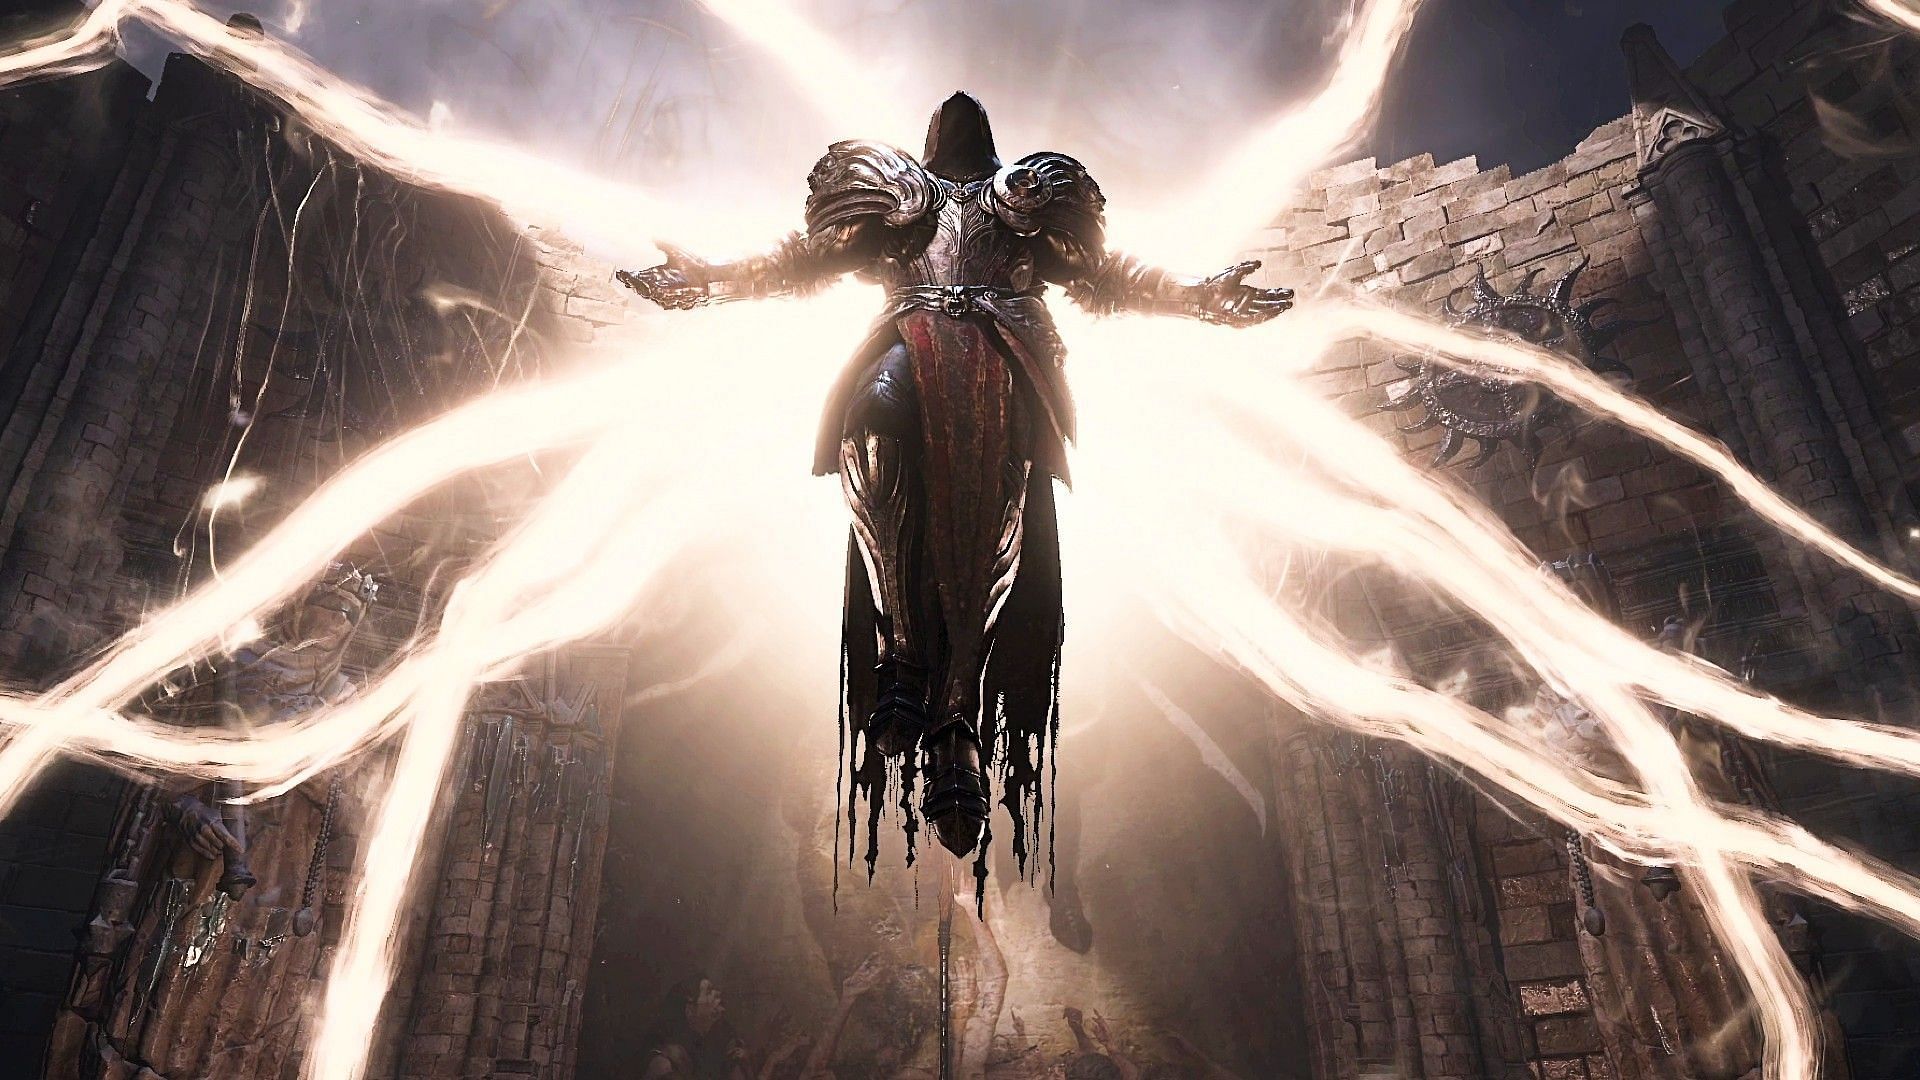 PC fans of Diablo can take part in a free limited trial.